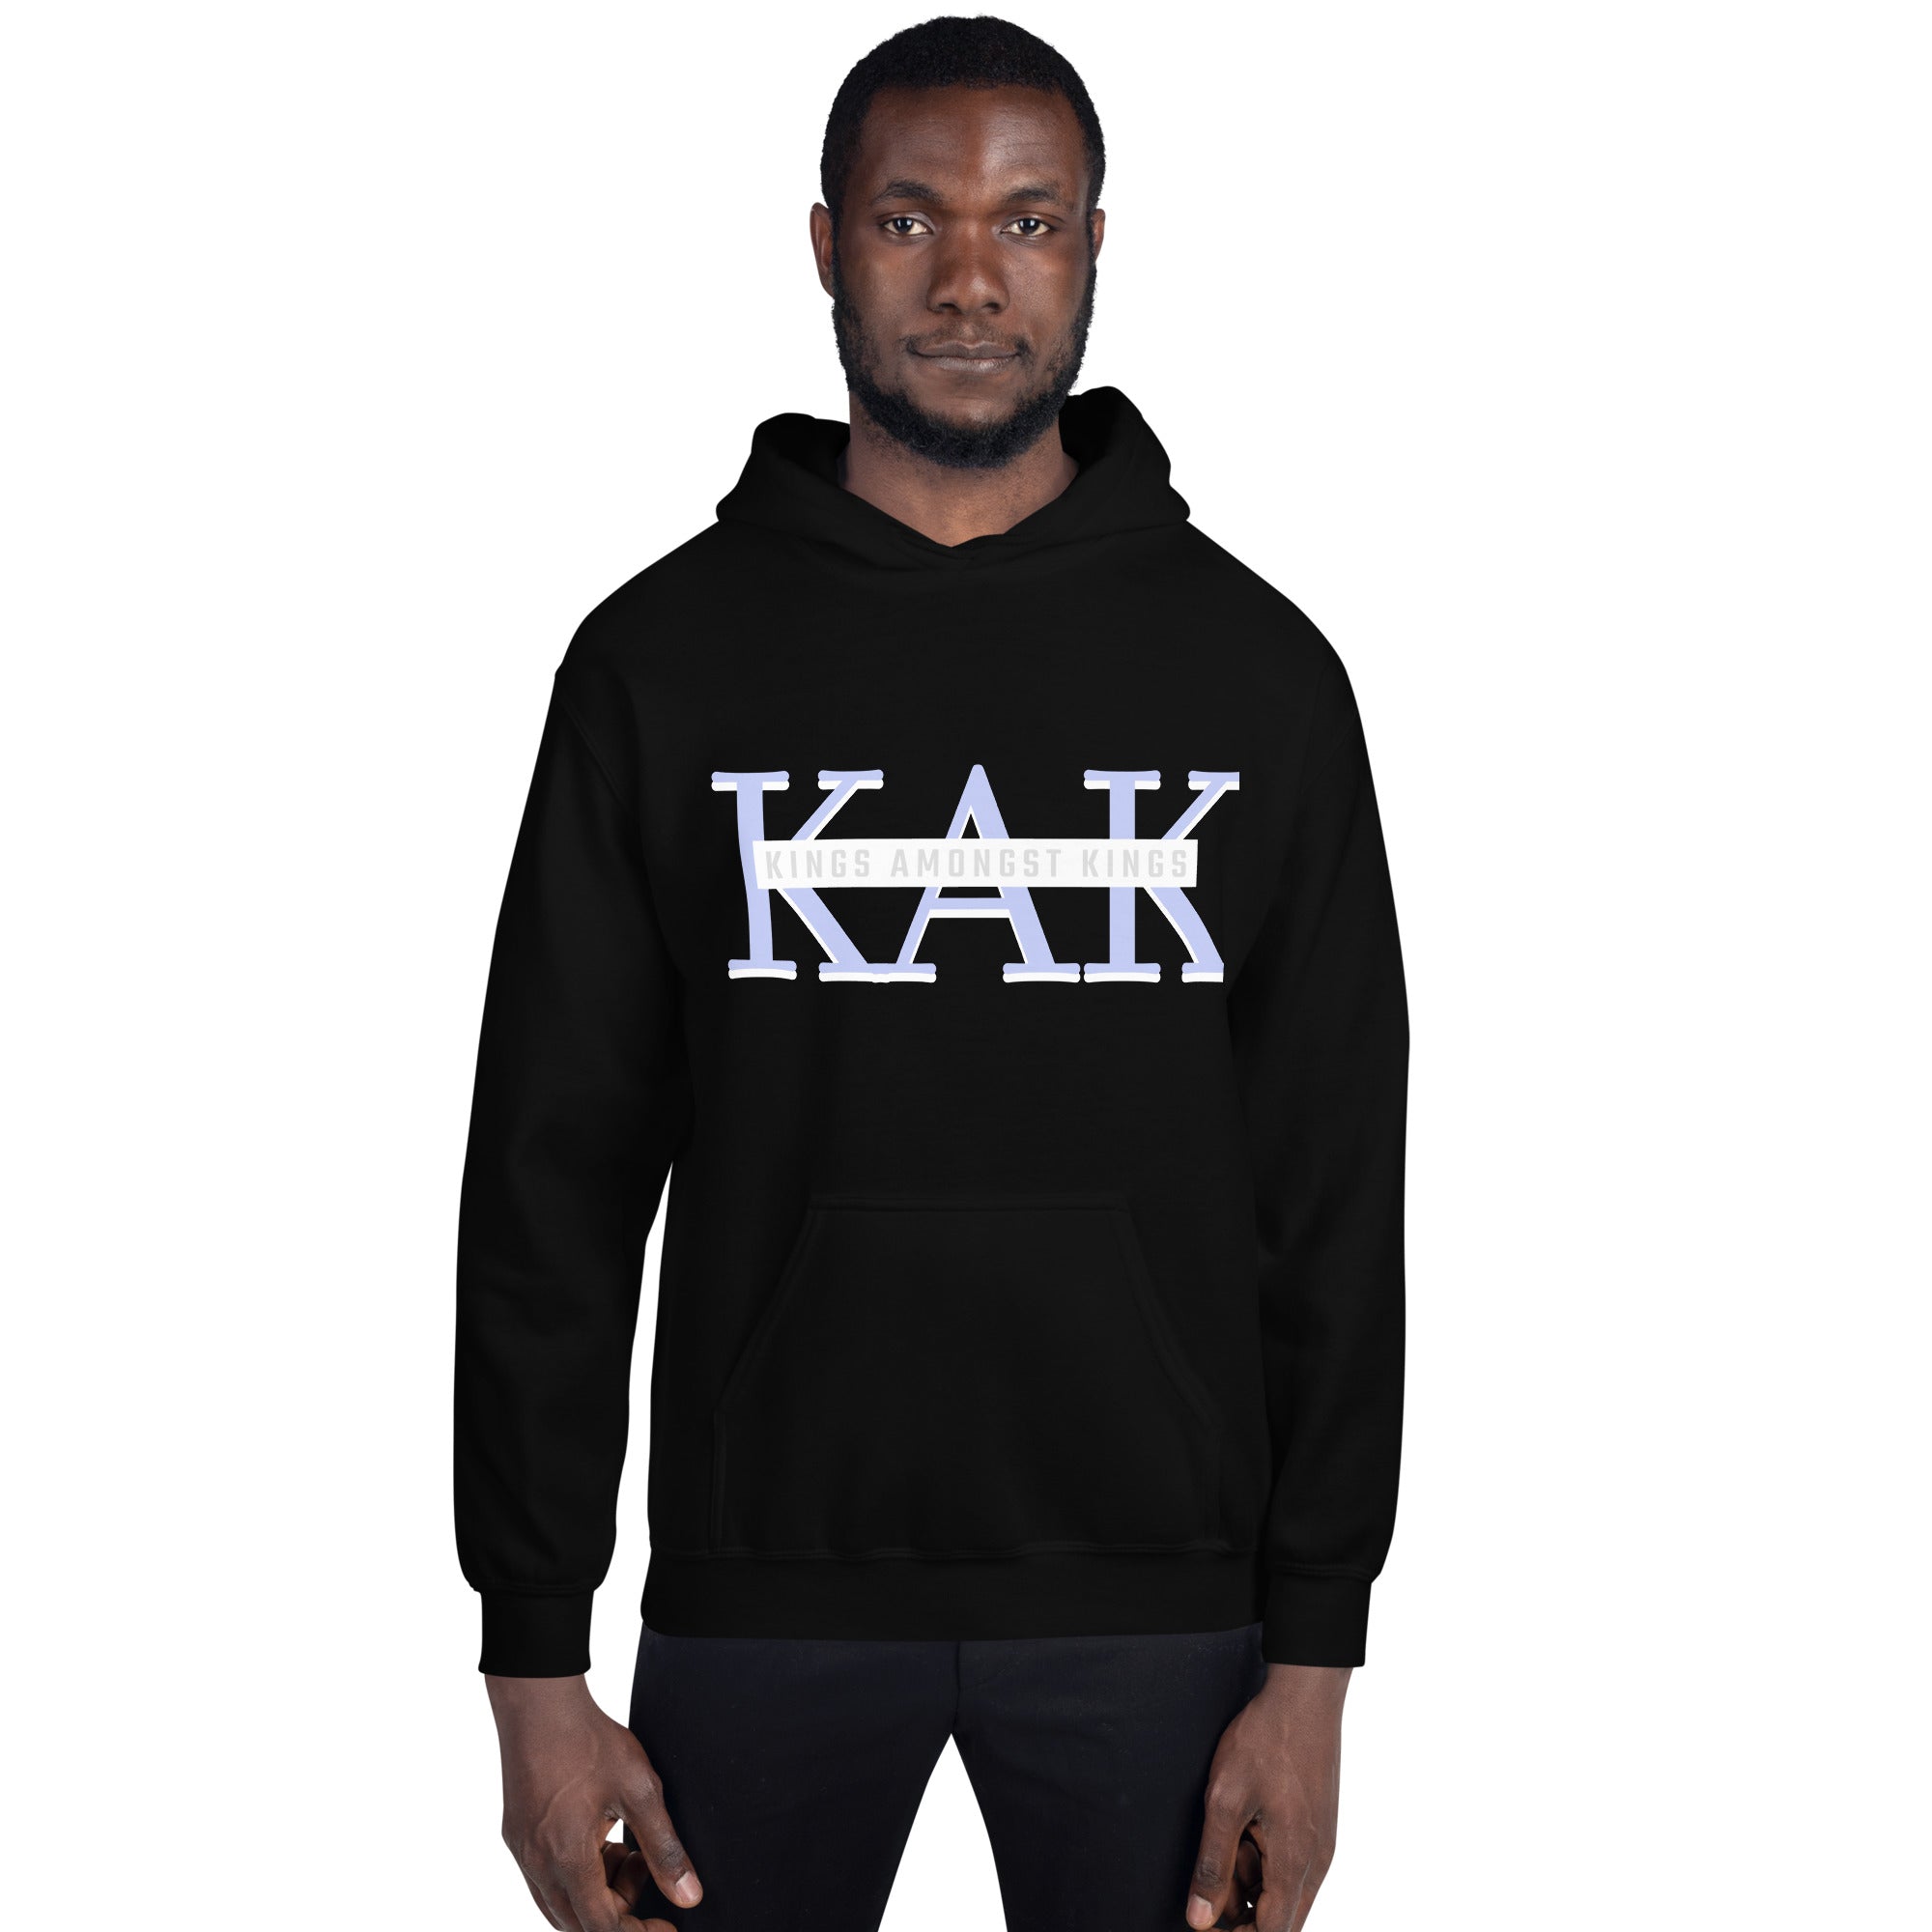 ALL KINGS MUST LIFTUnisex Hoodie - MobbMall